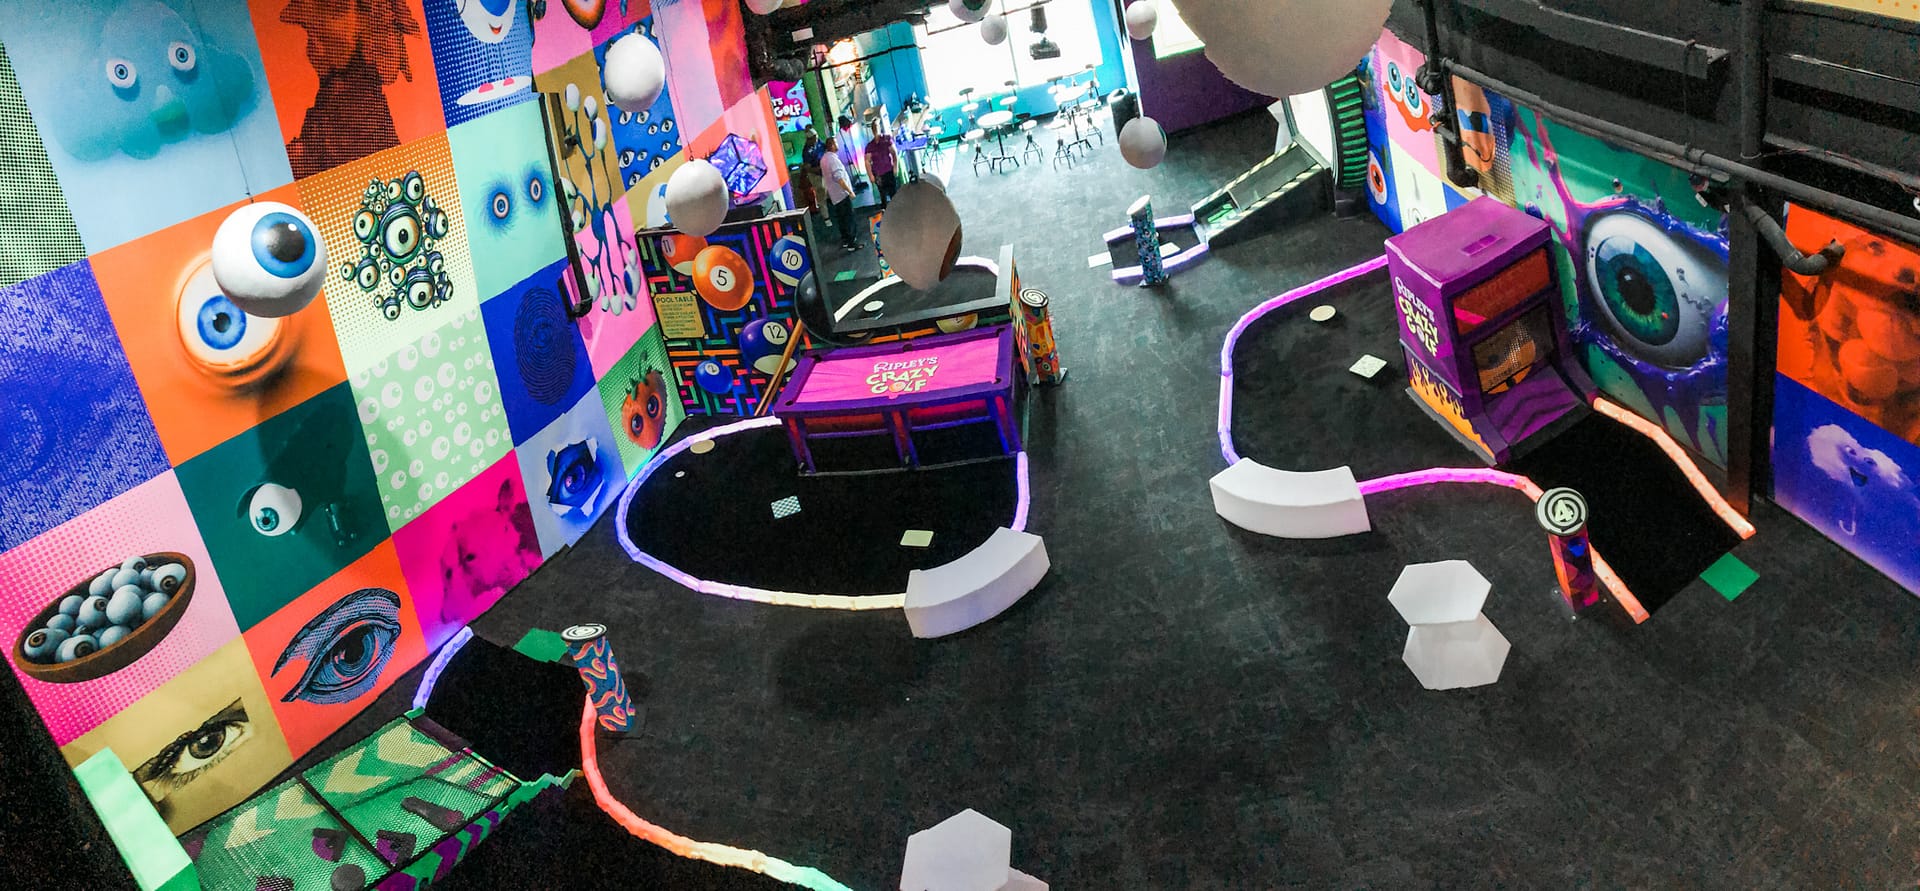 Ariel view of the interior of Ripley's Crazy Golf